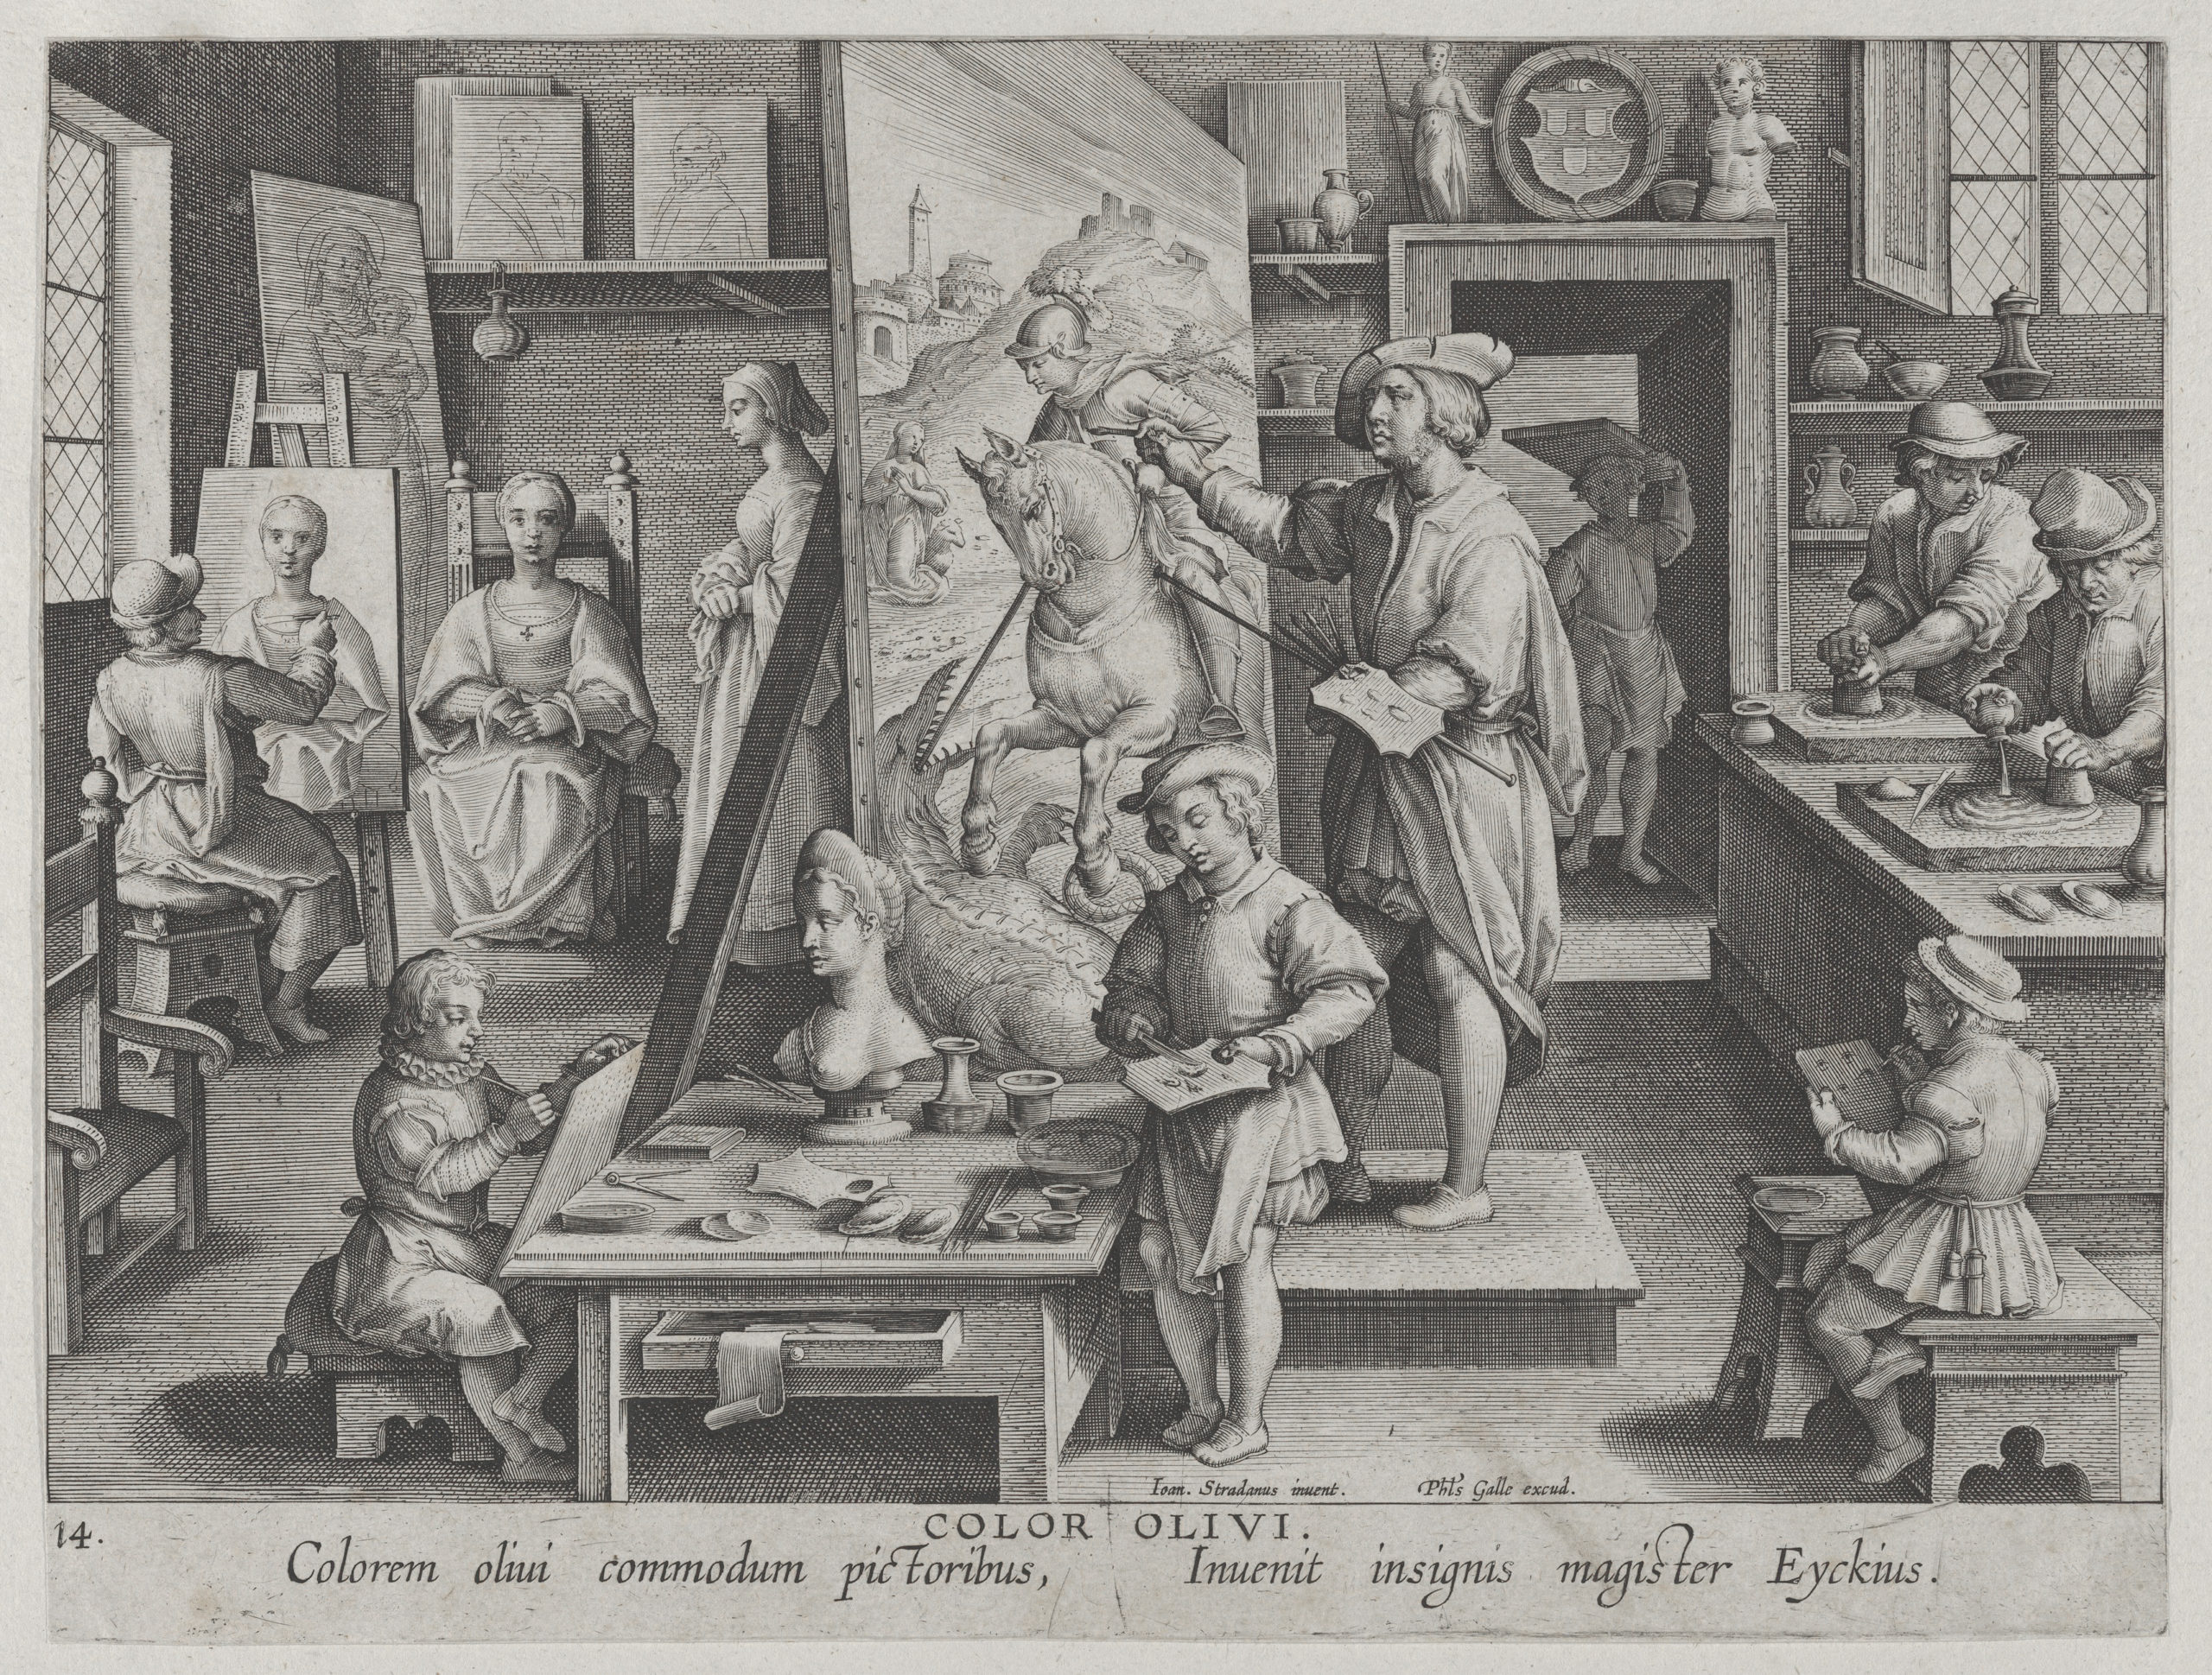 Jan Collaert I (after Stradanus), "Color Olivi" (or The invention of oil painting), c. 1600, engraving, in <em>Nova Reperta</em>, published by Philips Galle (<a href="http://www.metmuseum.org/art/collection/search/659725">The Metropolitan Museum of Art</a>)